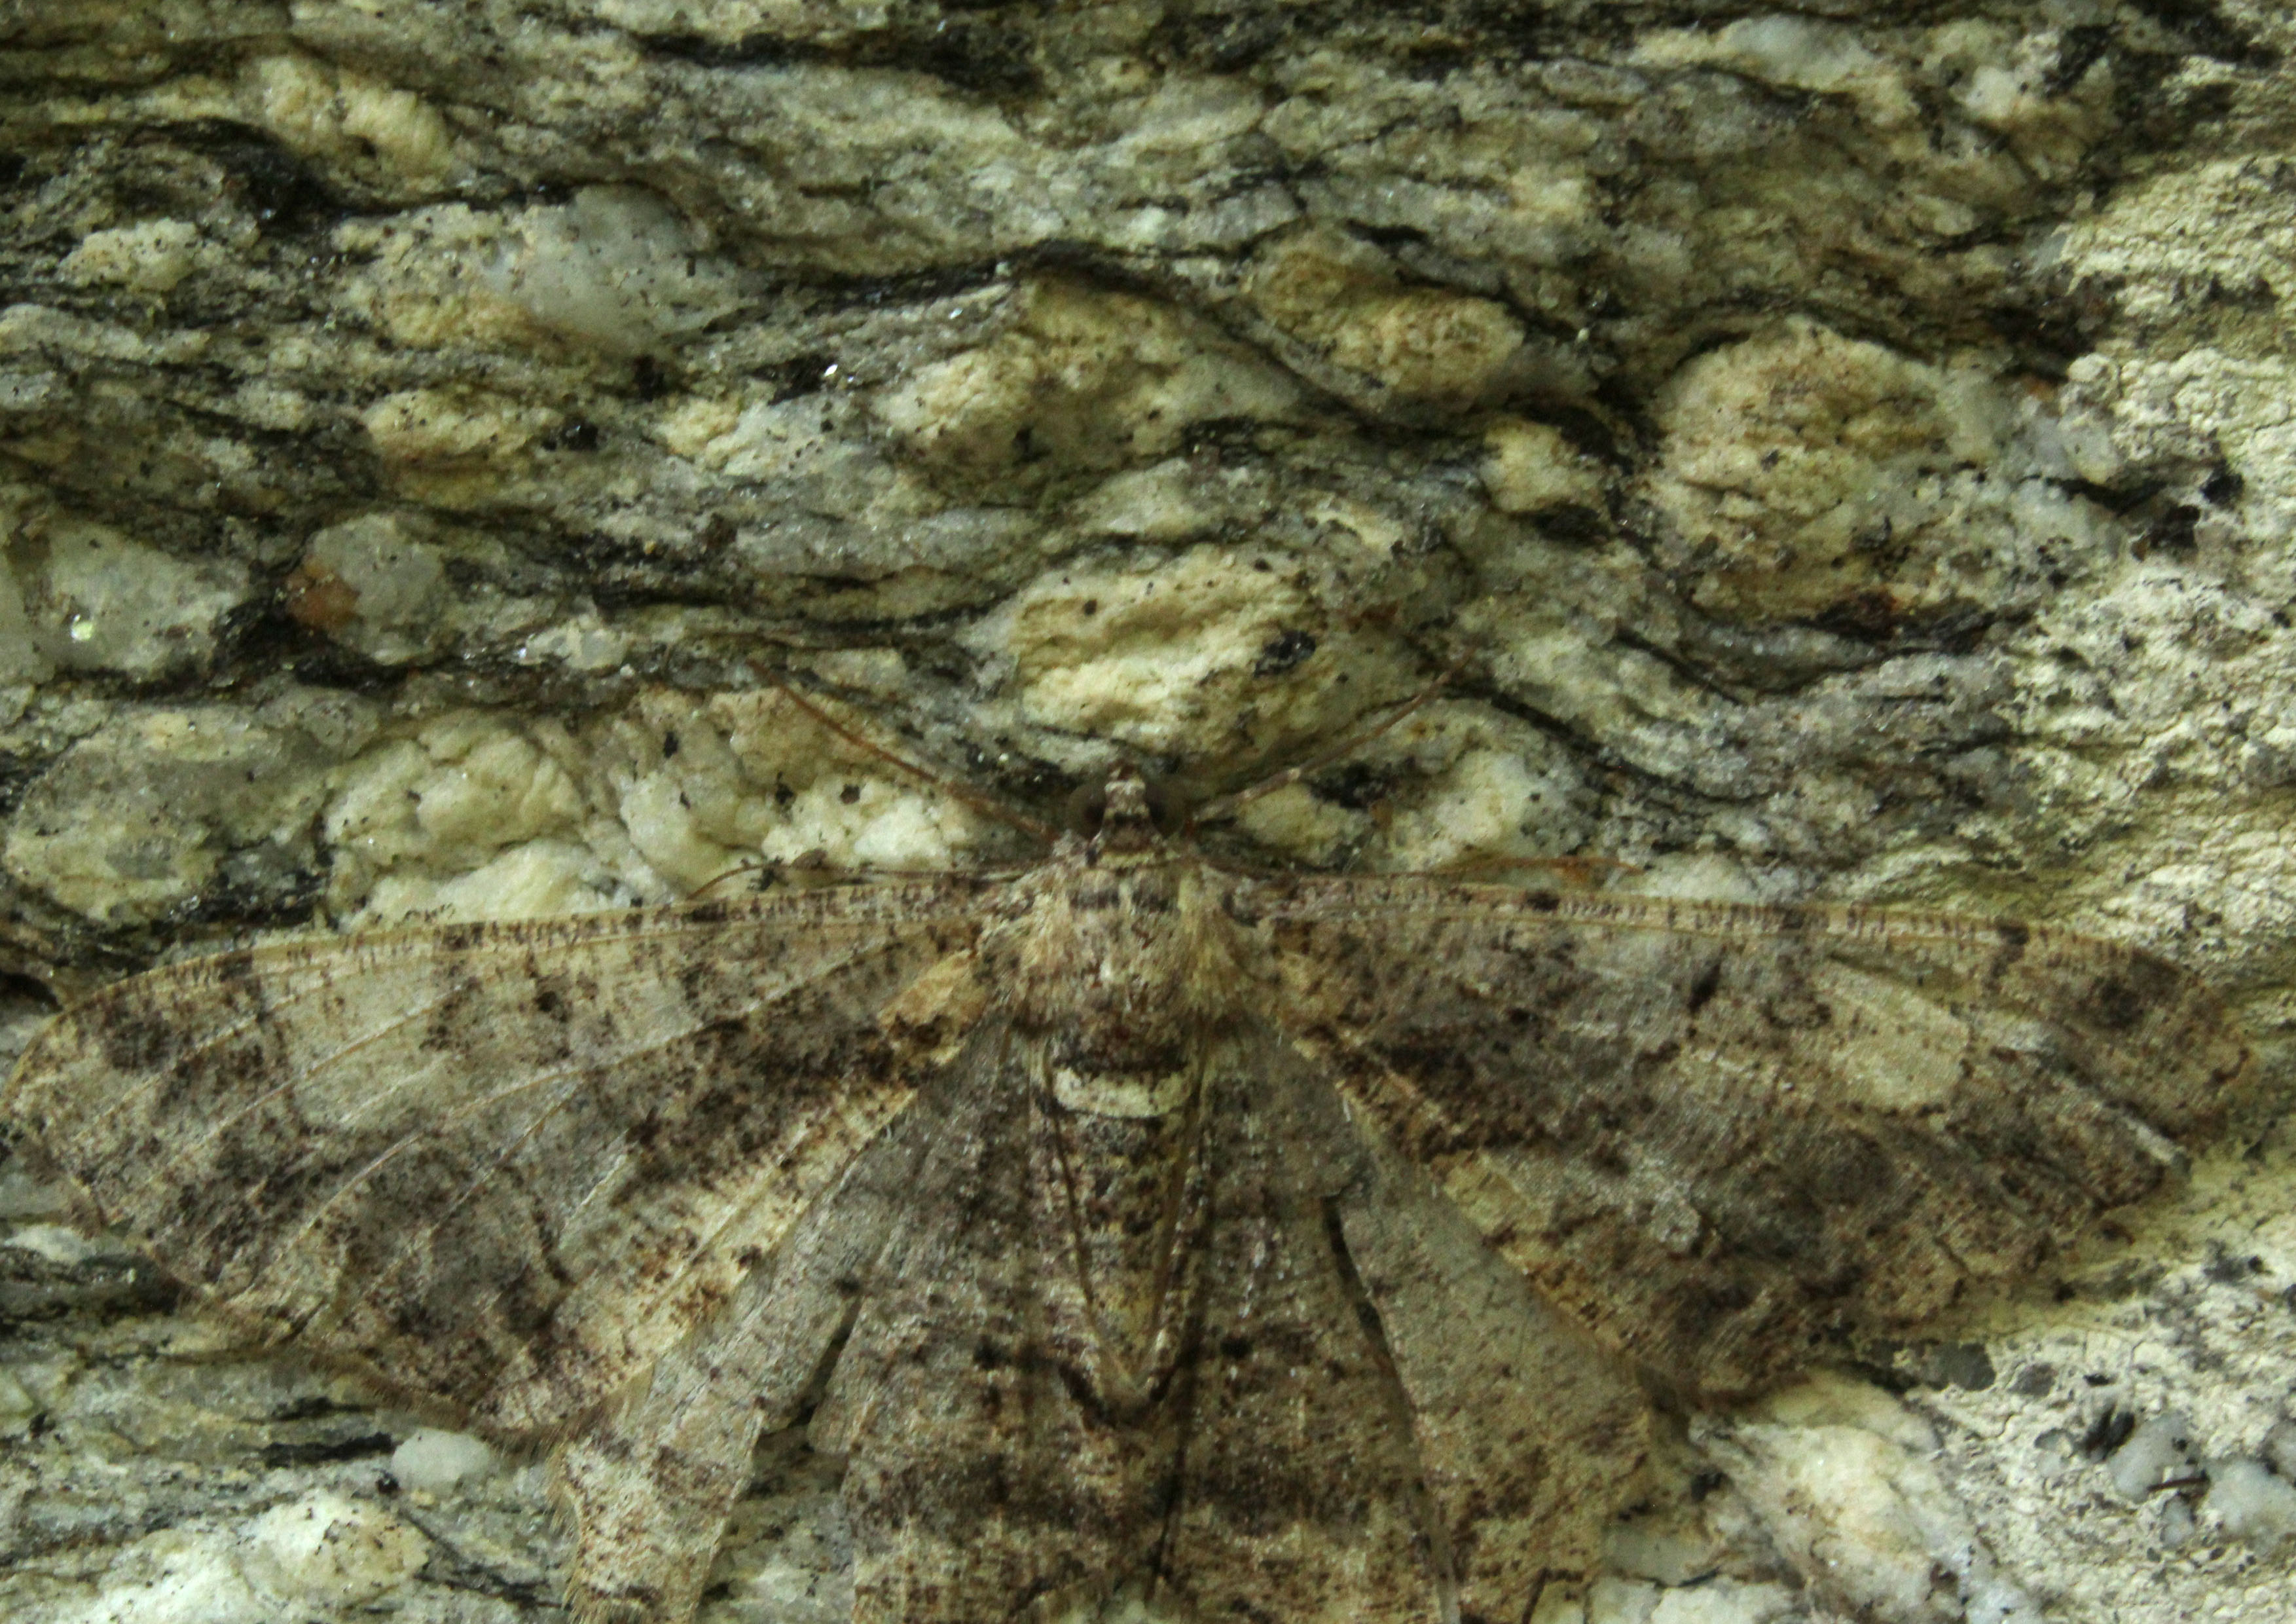 A moth in camouflage